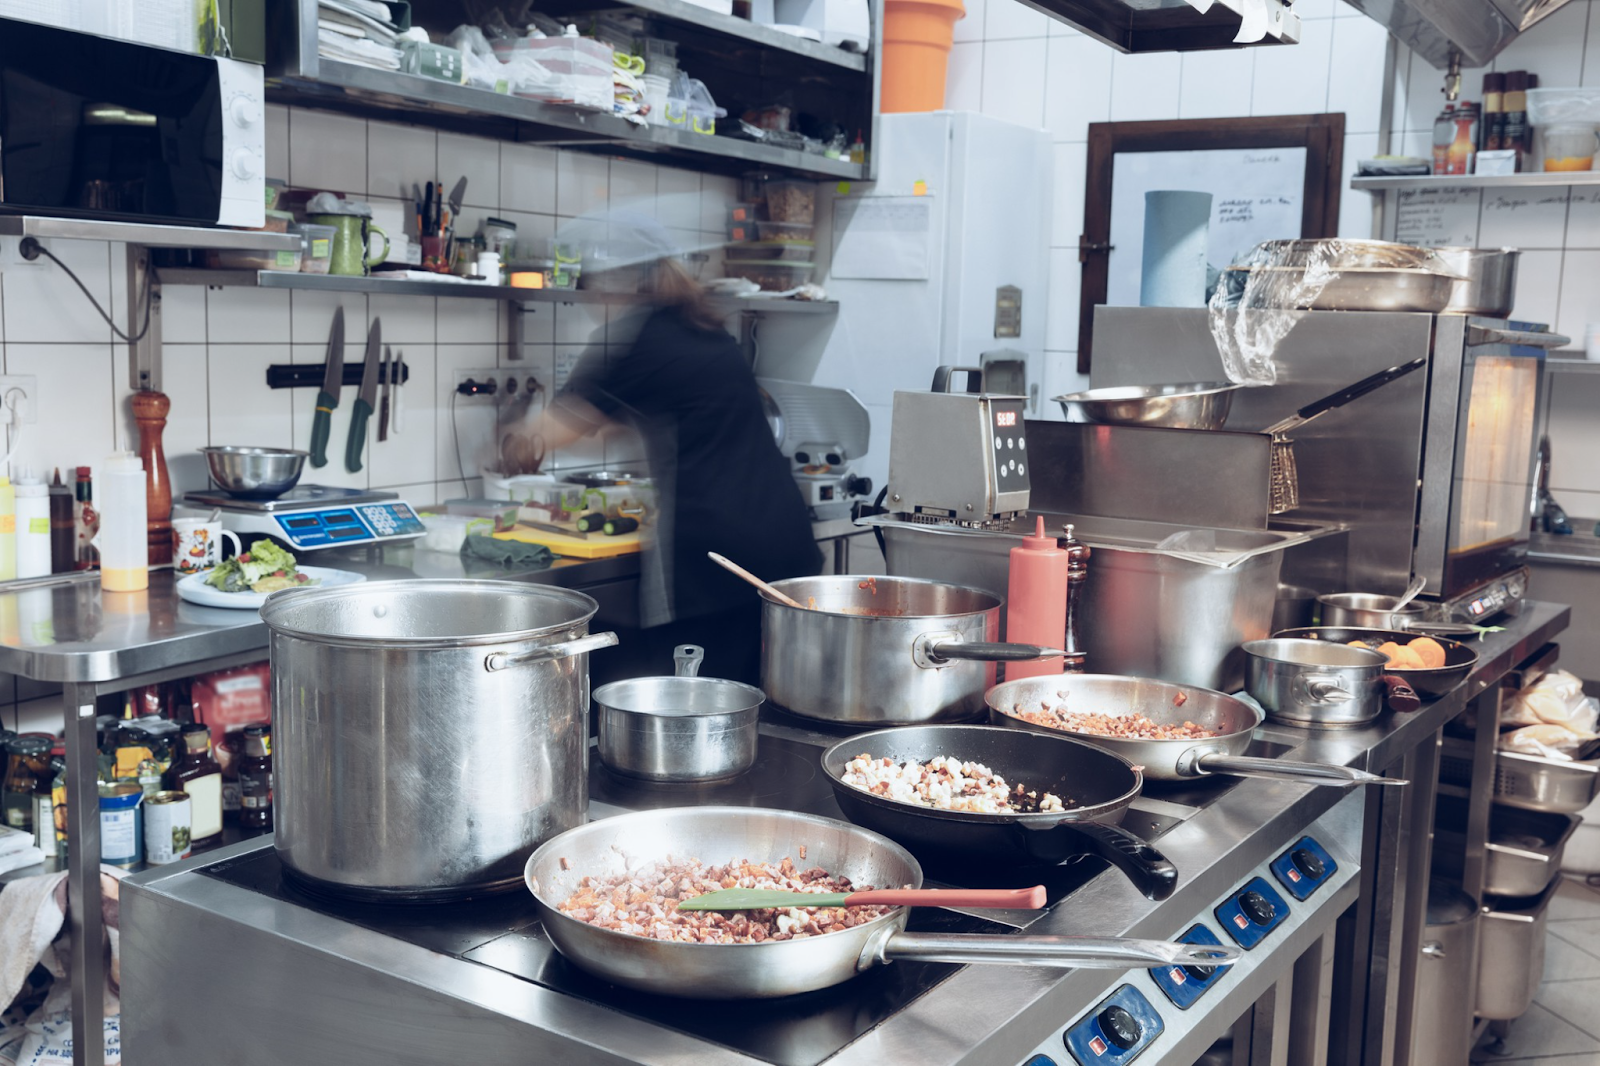 What are the Top Advantages of Food Service Equipment?